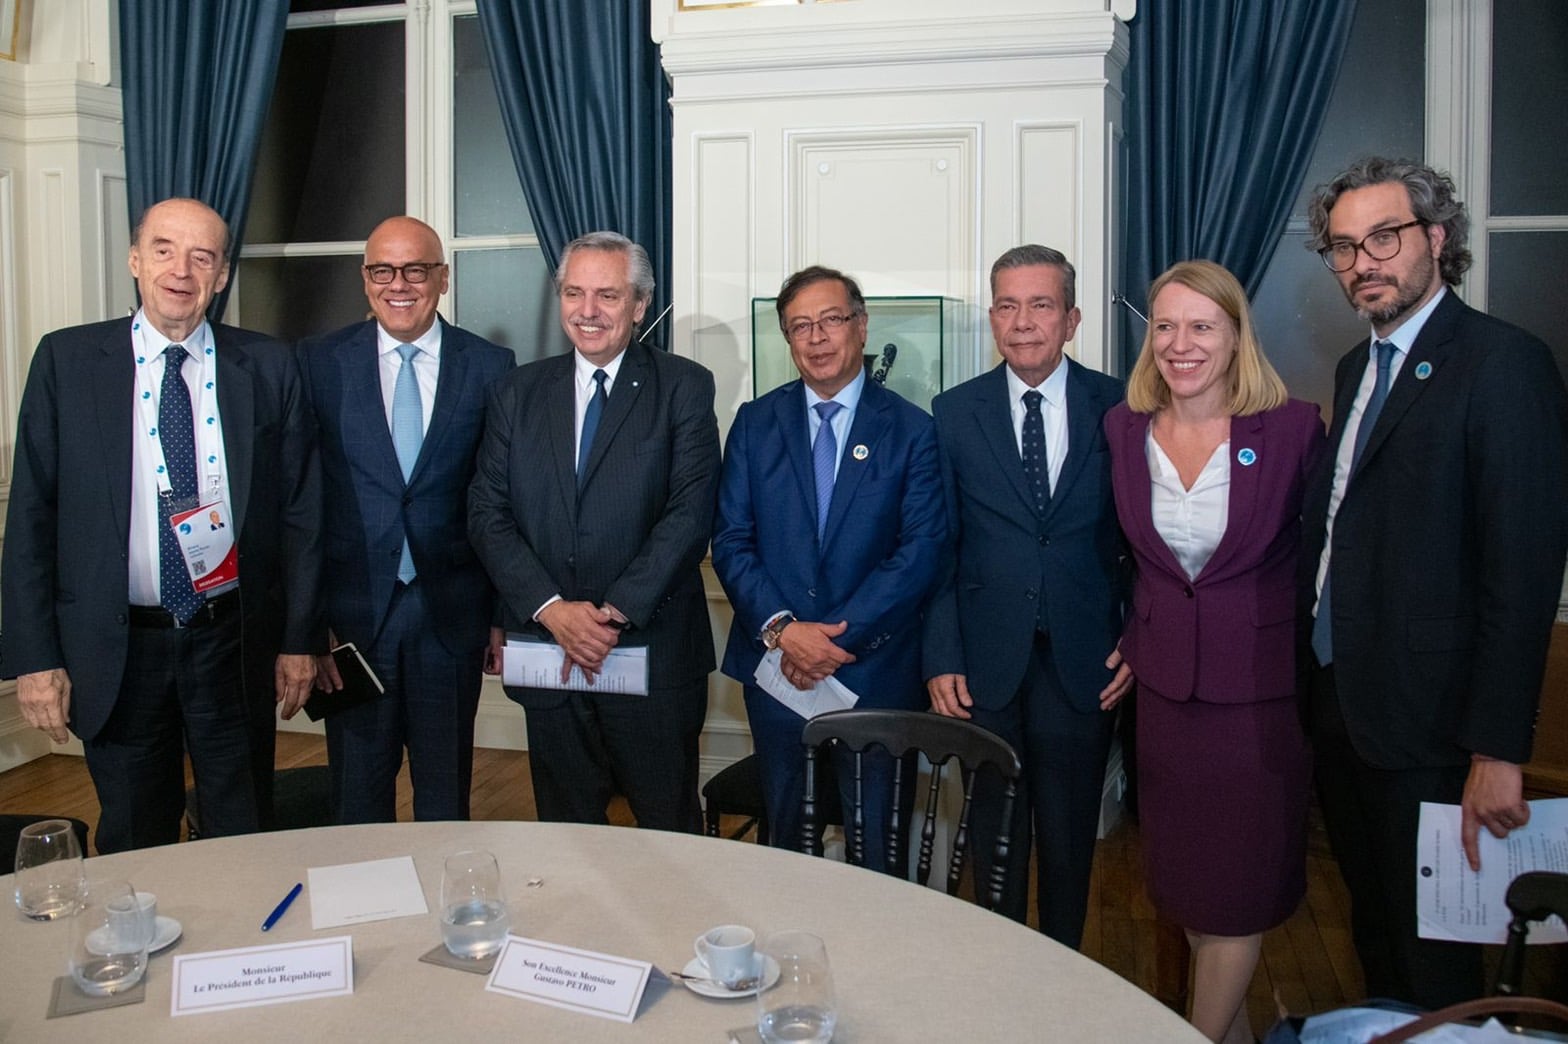 The president of Colombia, Gustavo Petro (center), in the company of Argentine President Alberto Fernández, Venezuelan National Assembly President Jorge Rodríguez, Venezuelan opposition spokesperson Gerardo Blyde, and representatives of the governments of Norway, France, and Argentina. Photo: Twitter/@petrogustavo.